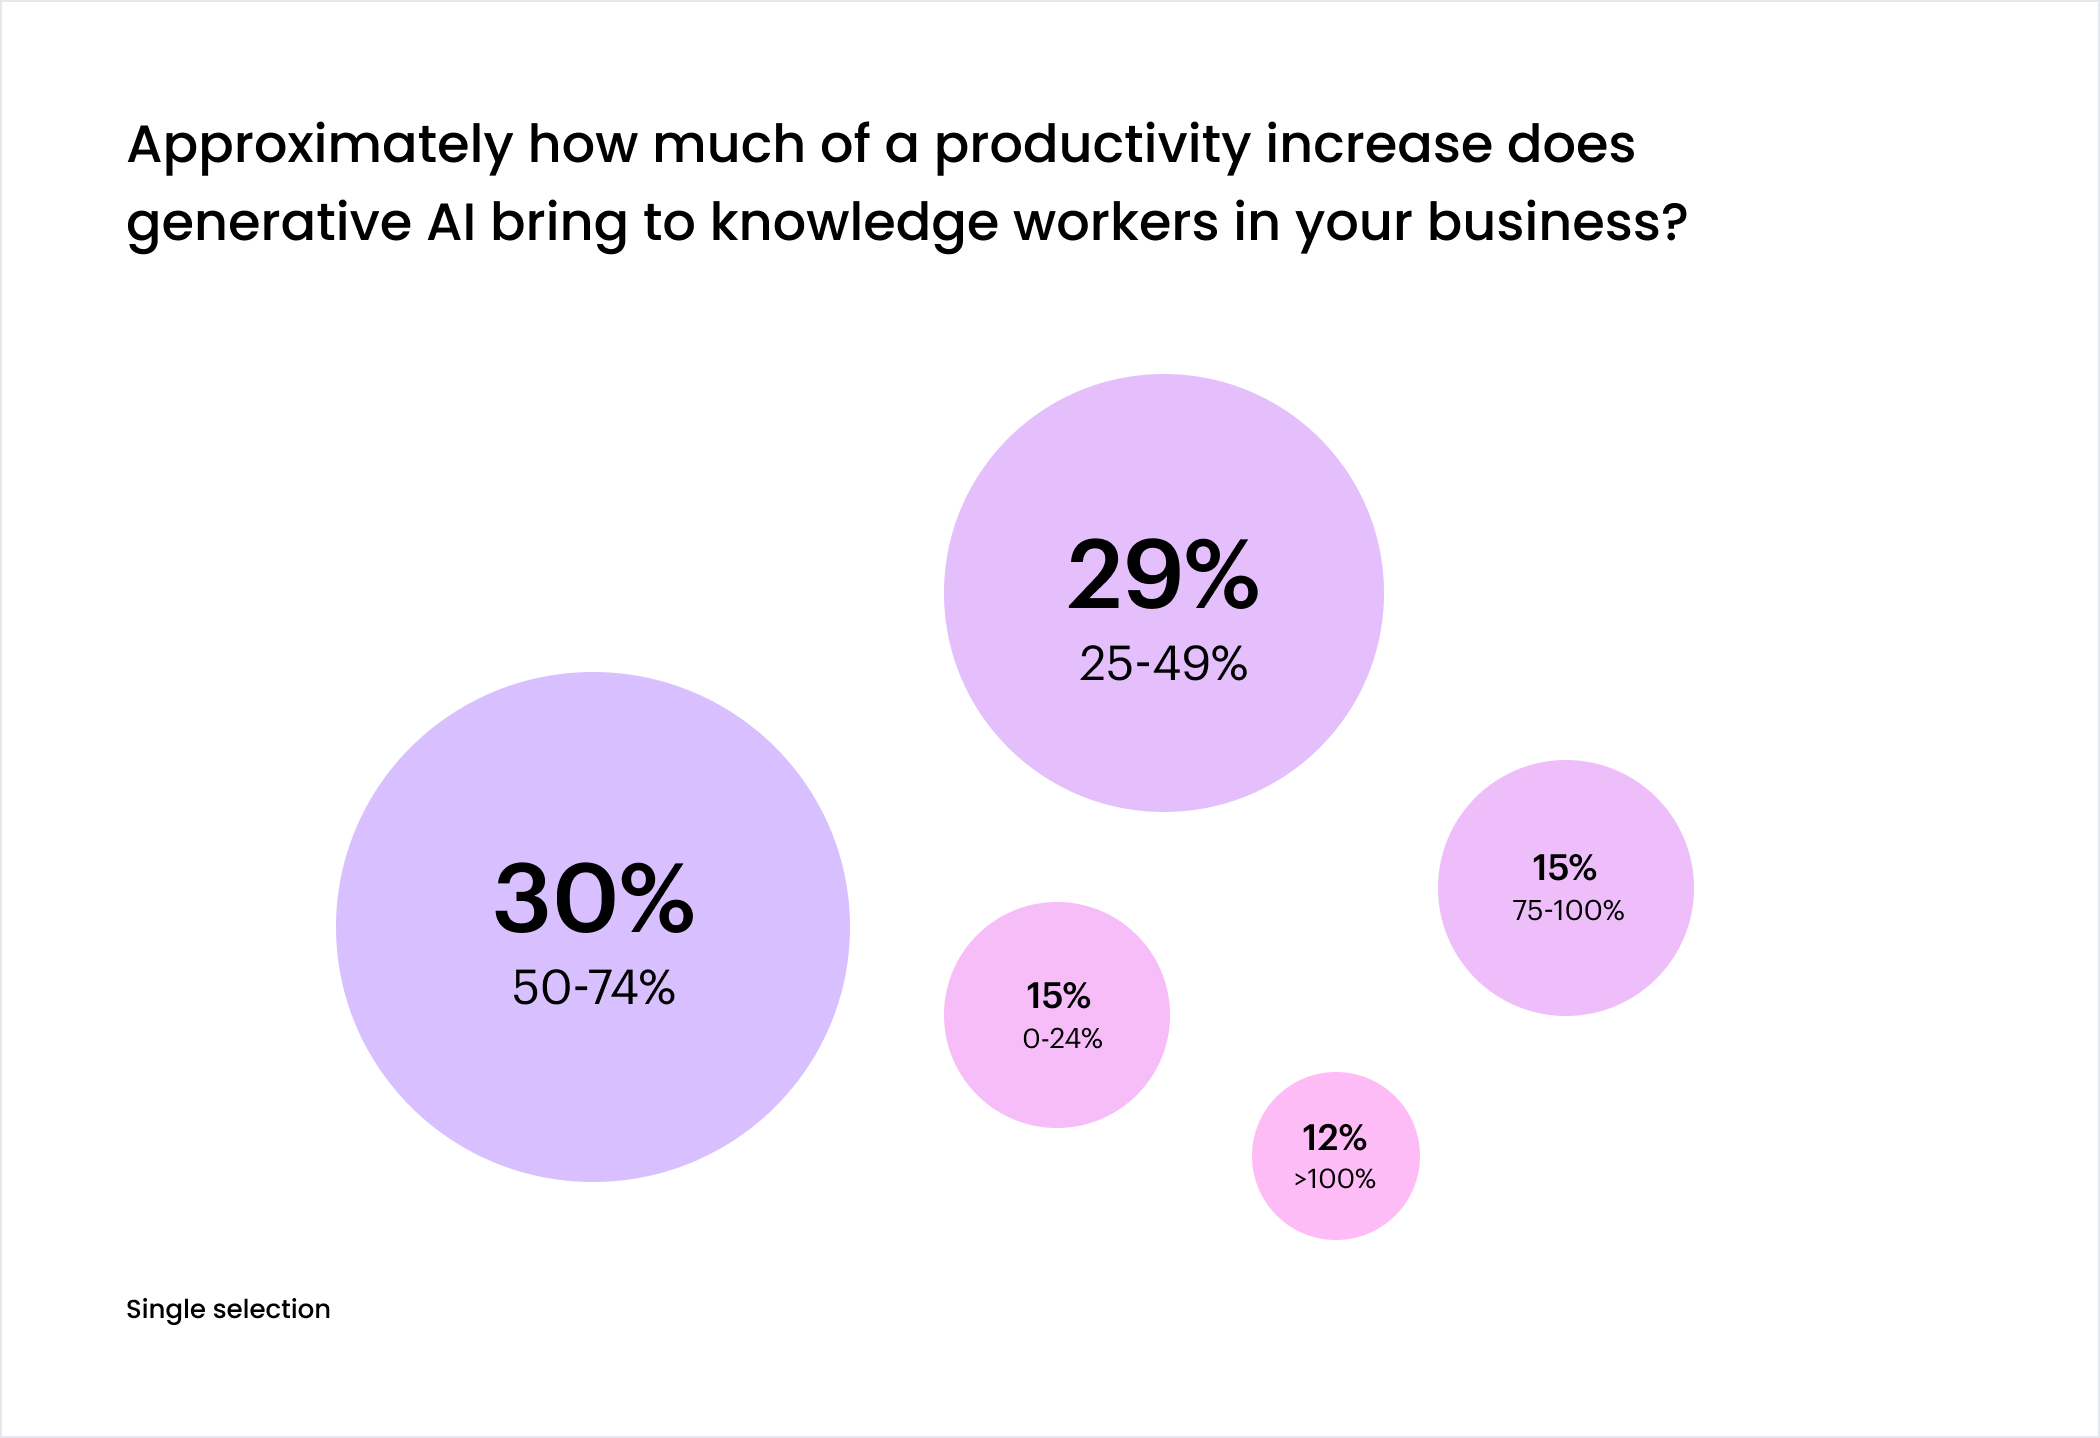 Chart: Approximately how much of a productivity increase does generative AI bring to knowledge workers in your business?